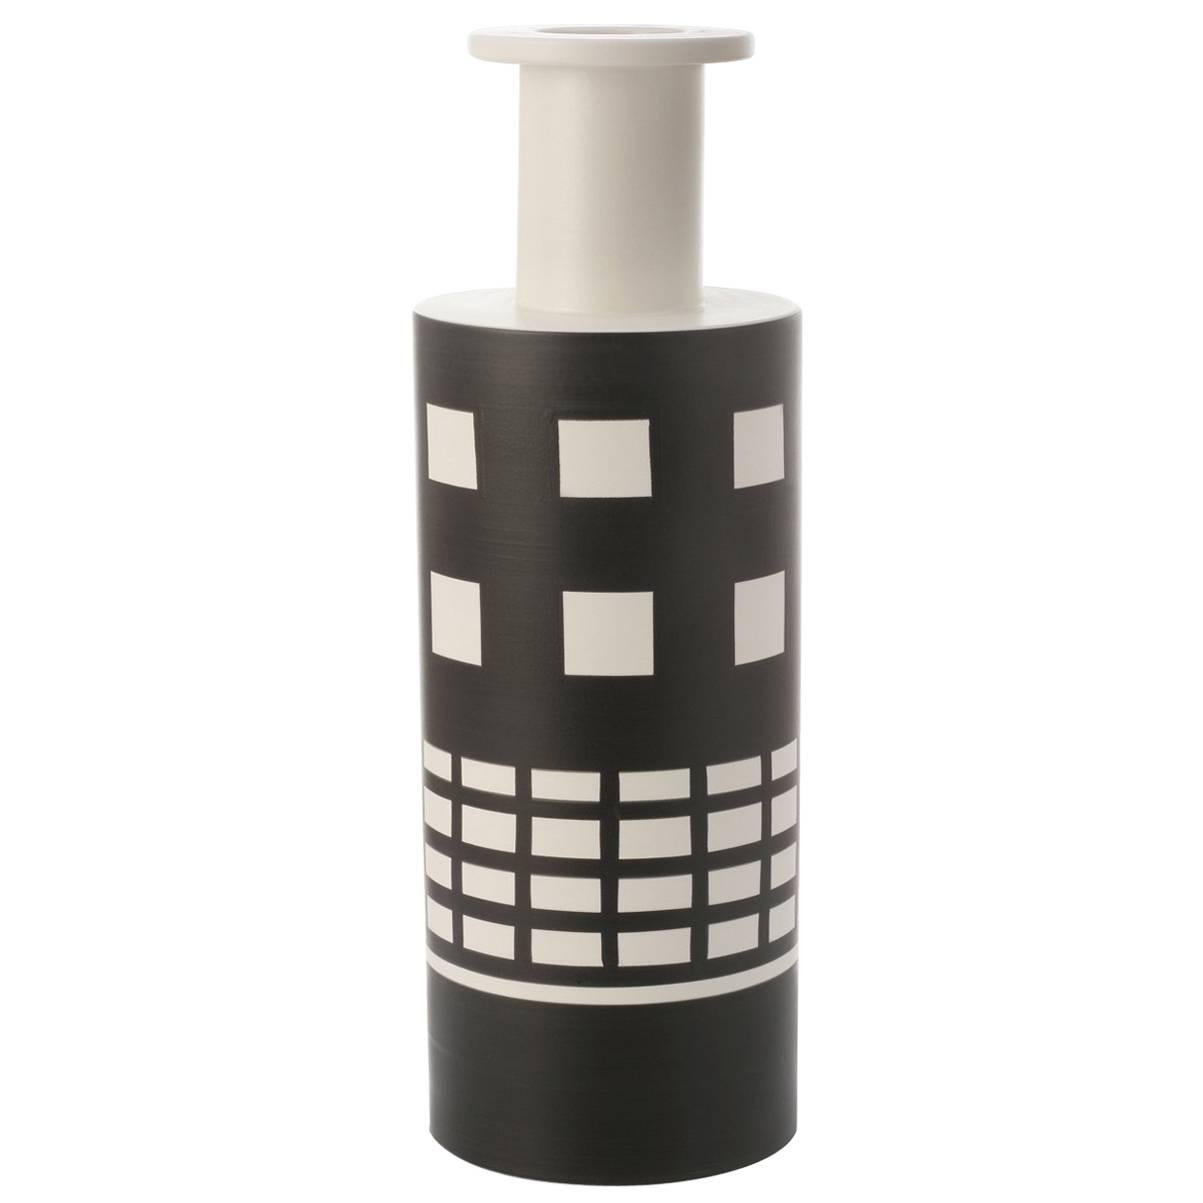 Black and White Reel Vase by Ettore Sottsass For Sale